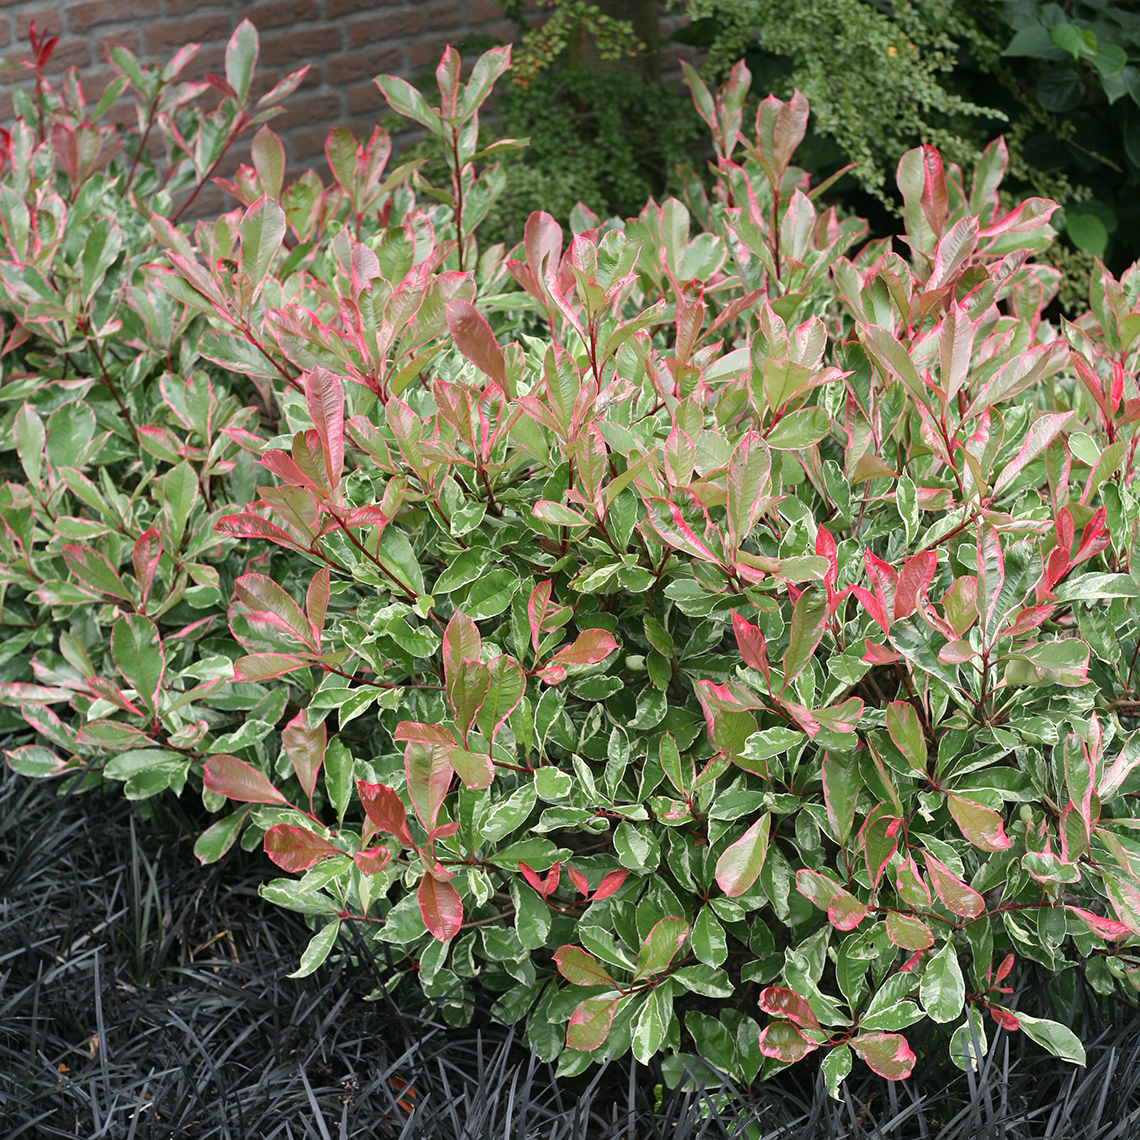 Variegated Pink Marble Photinia planted with Ophiopogon